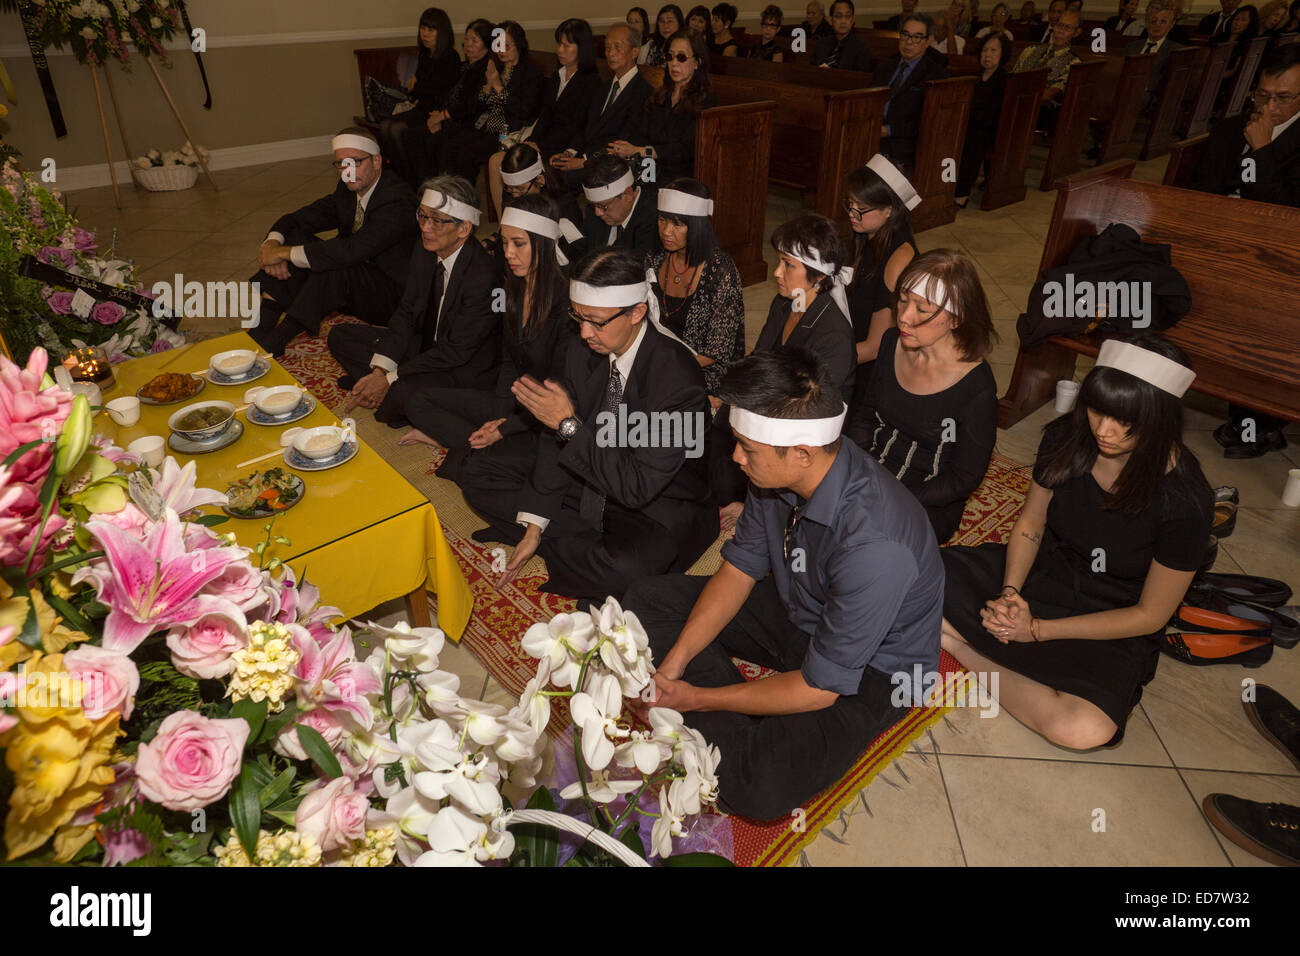 Family members, mourners at Vietnamese funeral service, Little Saigon district, city of Westminster, Orange County, California Stock Photo